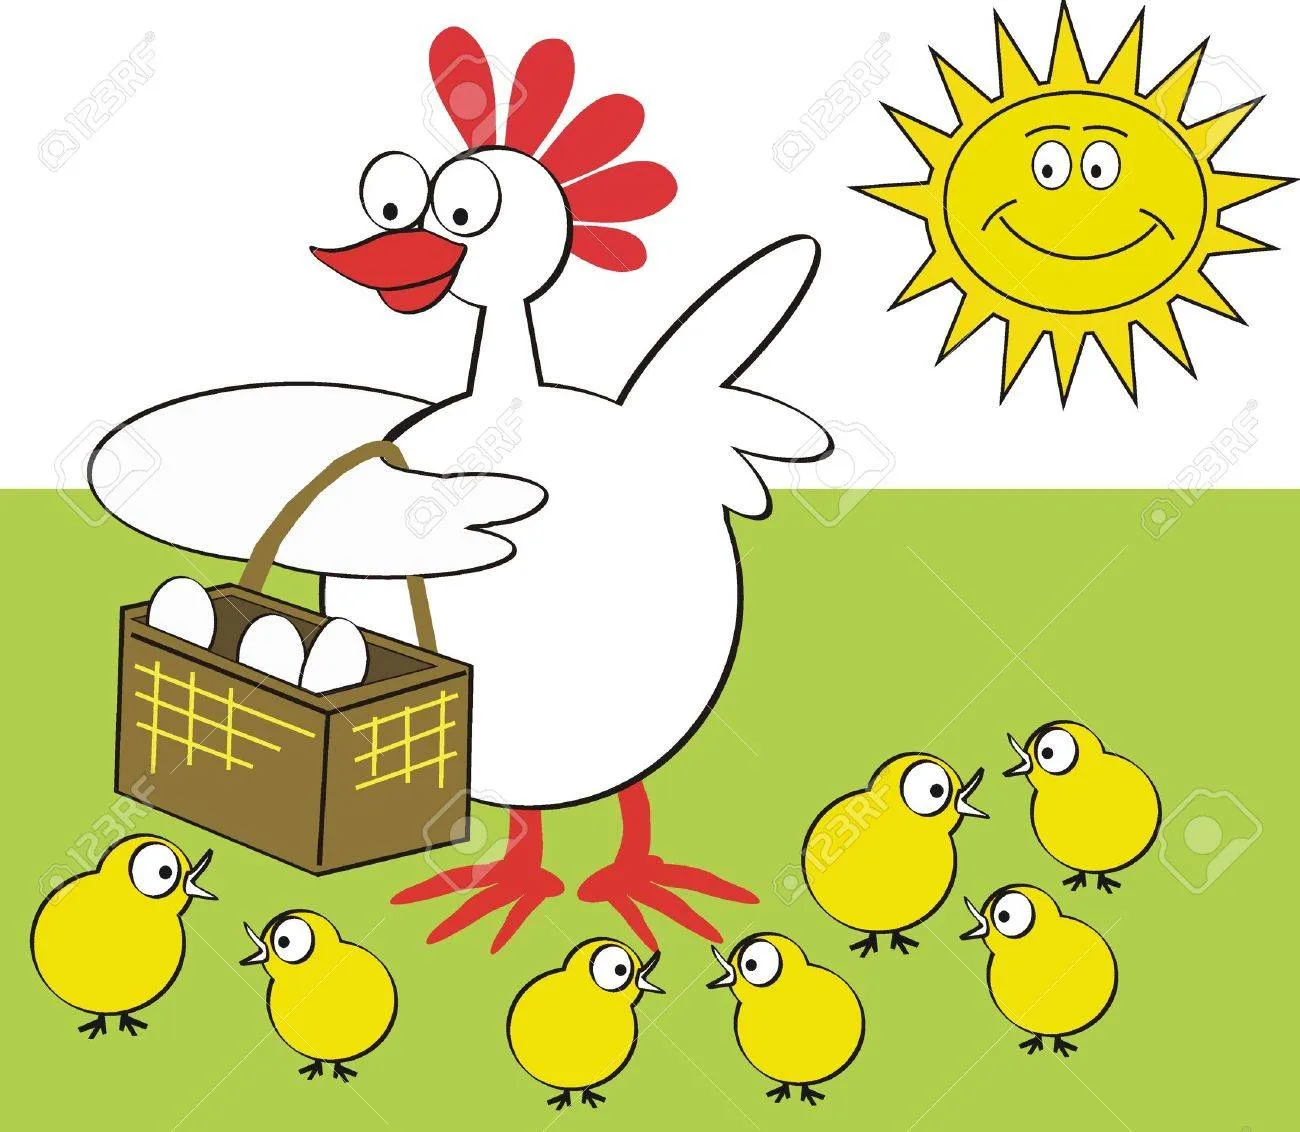 Images For > Gallinas Caricatura